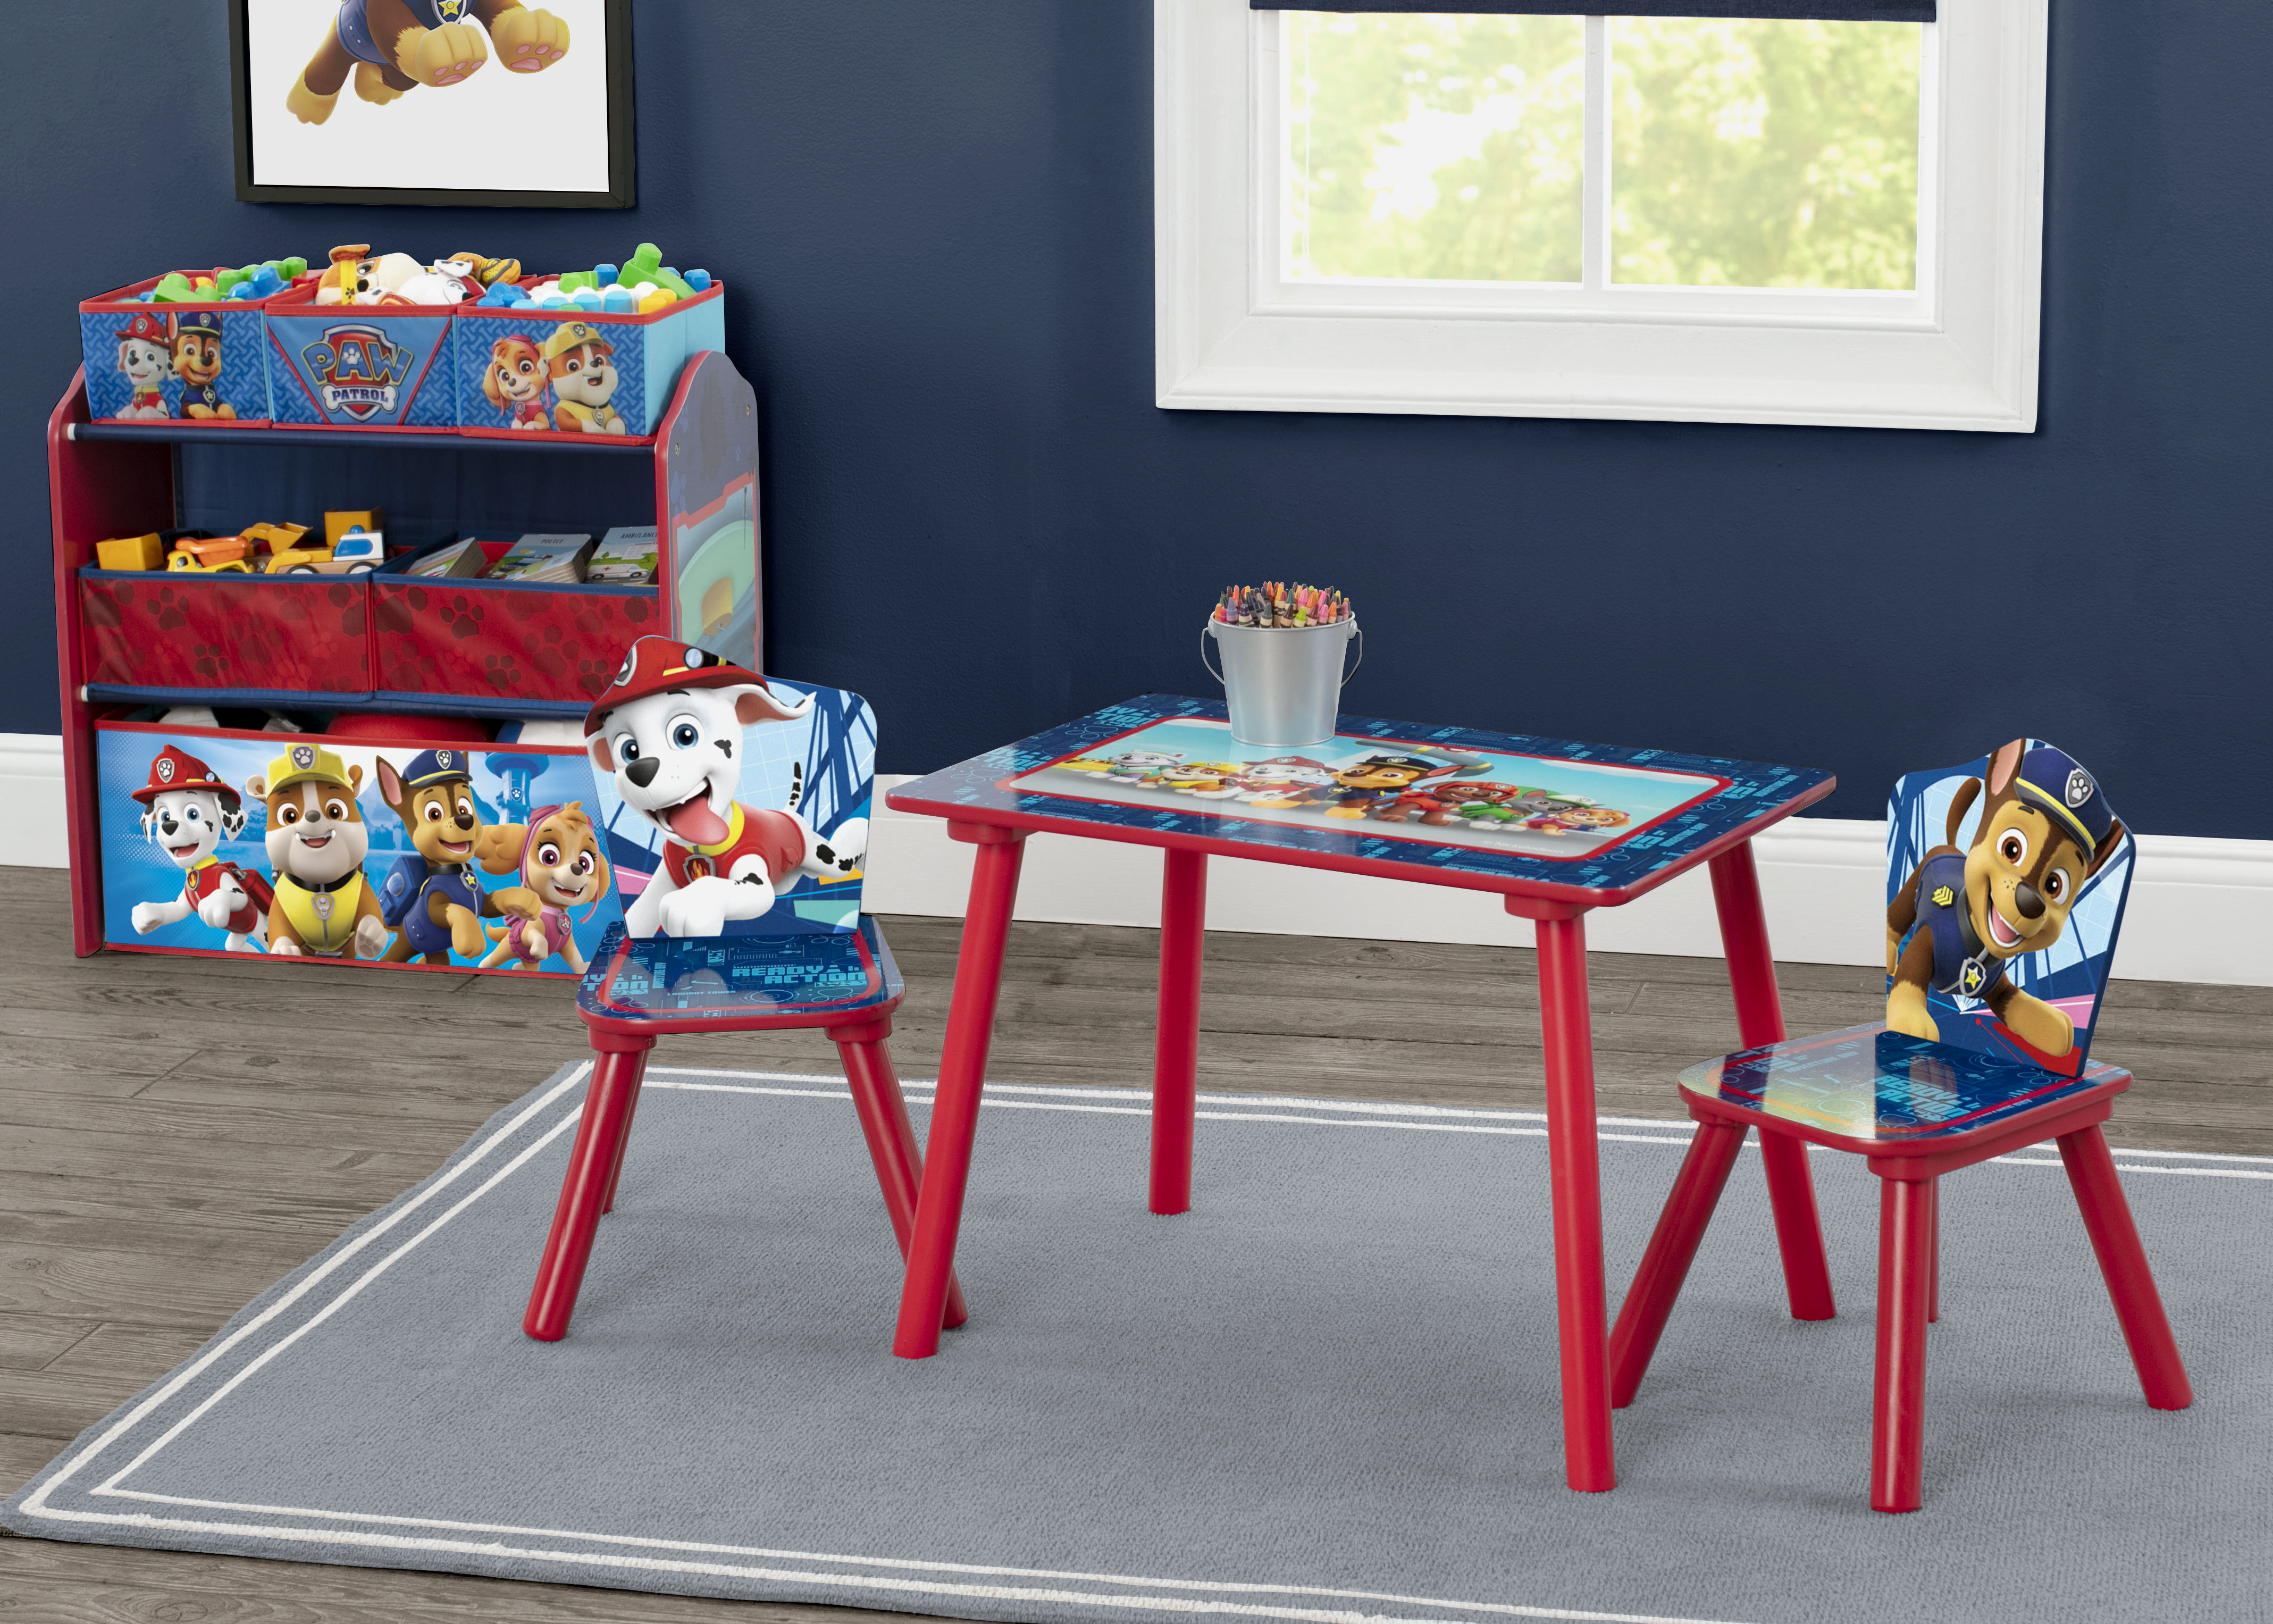 Paw Patrol 4-Piece Toddler Playroom Set Includes Table, 2 Chairs & Toy Bin, Blue